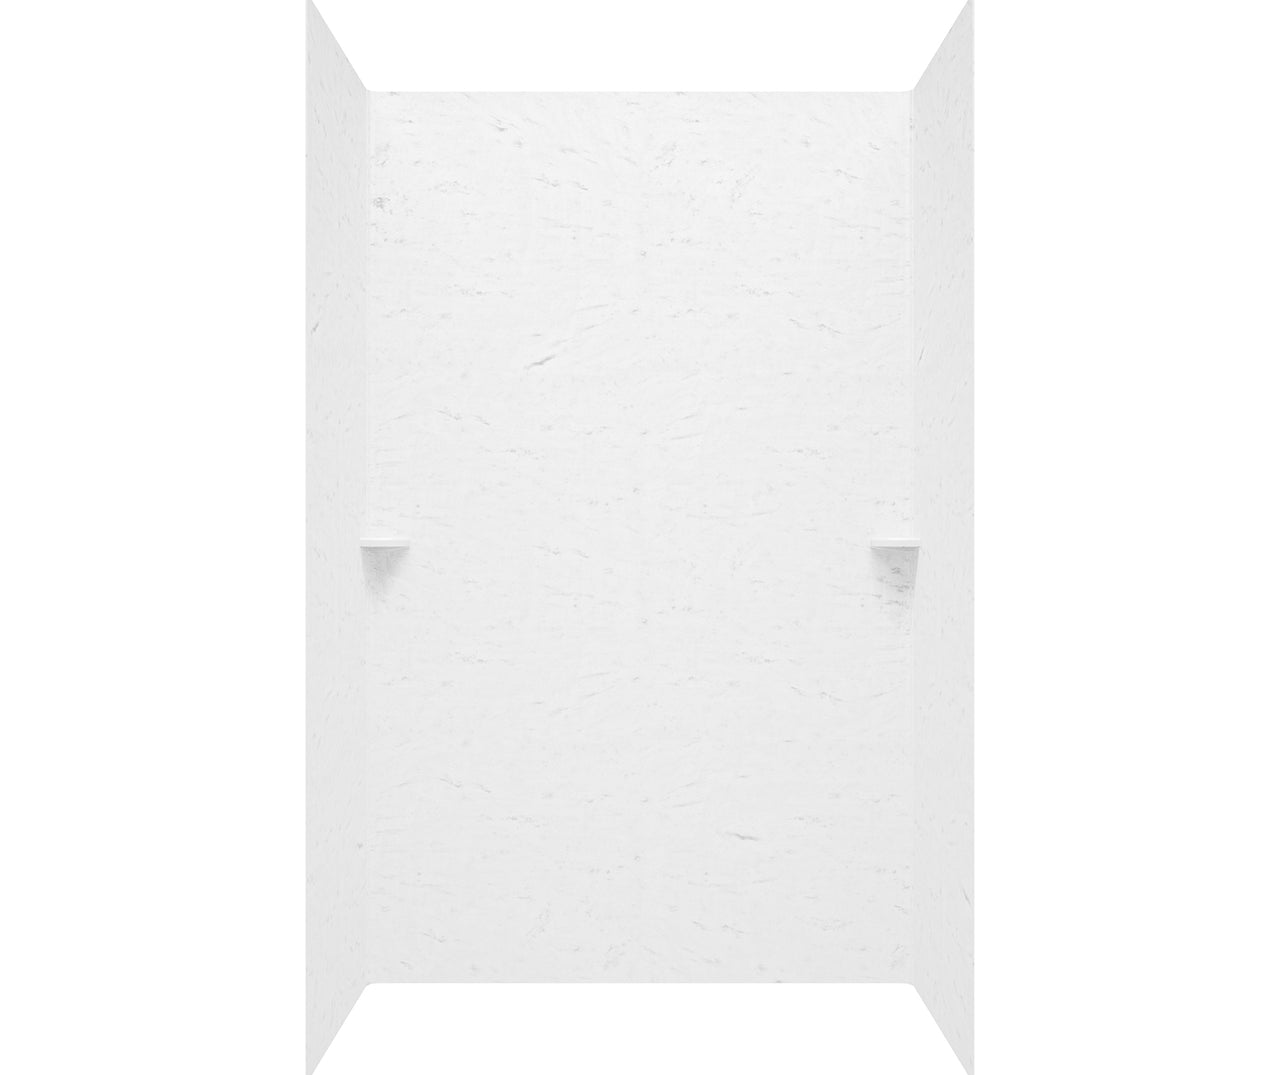 36-In x 62-In x 96-In Swanstone Solid Surface Shower Wall - BNGBath